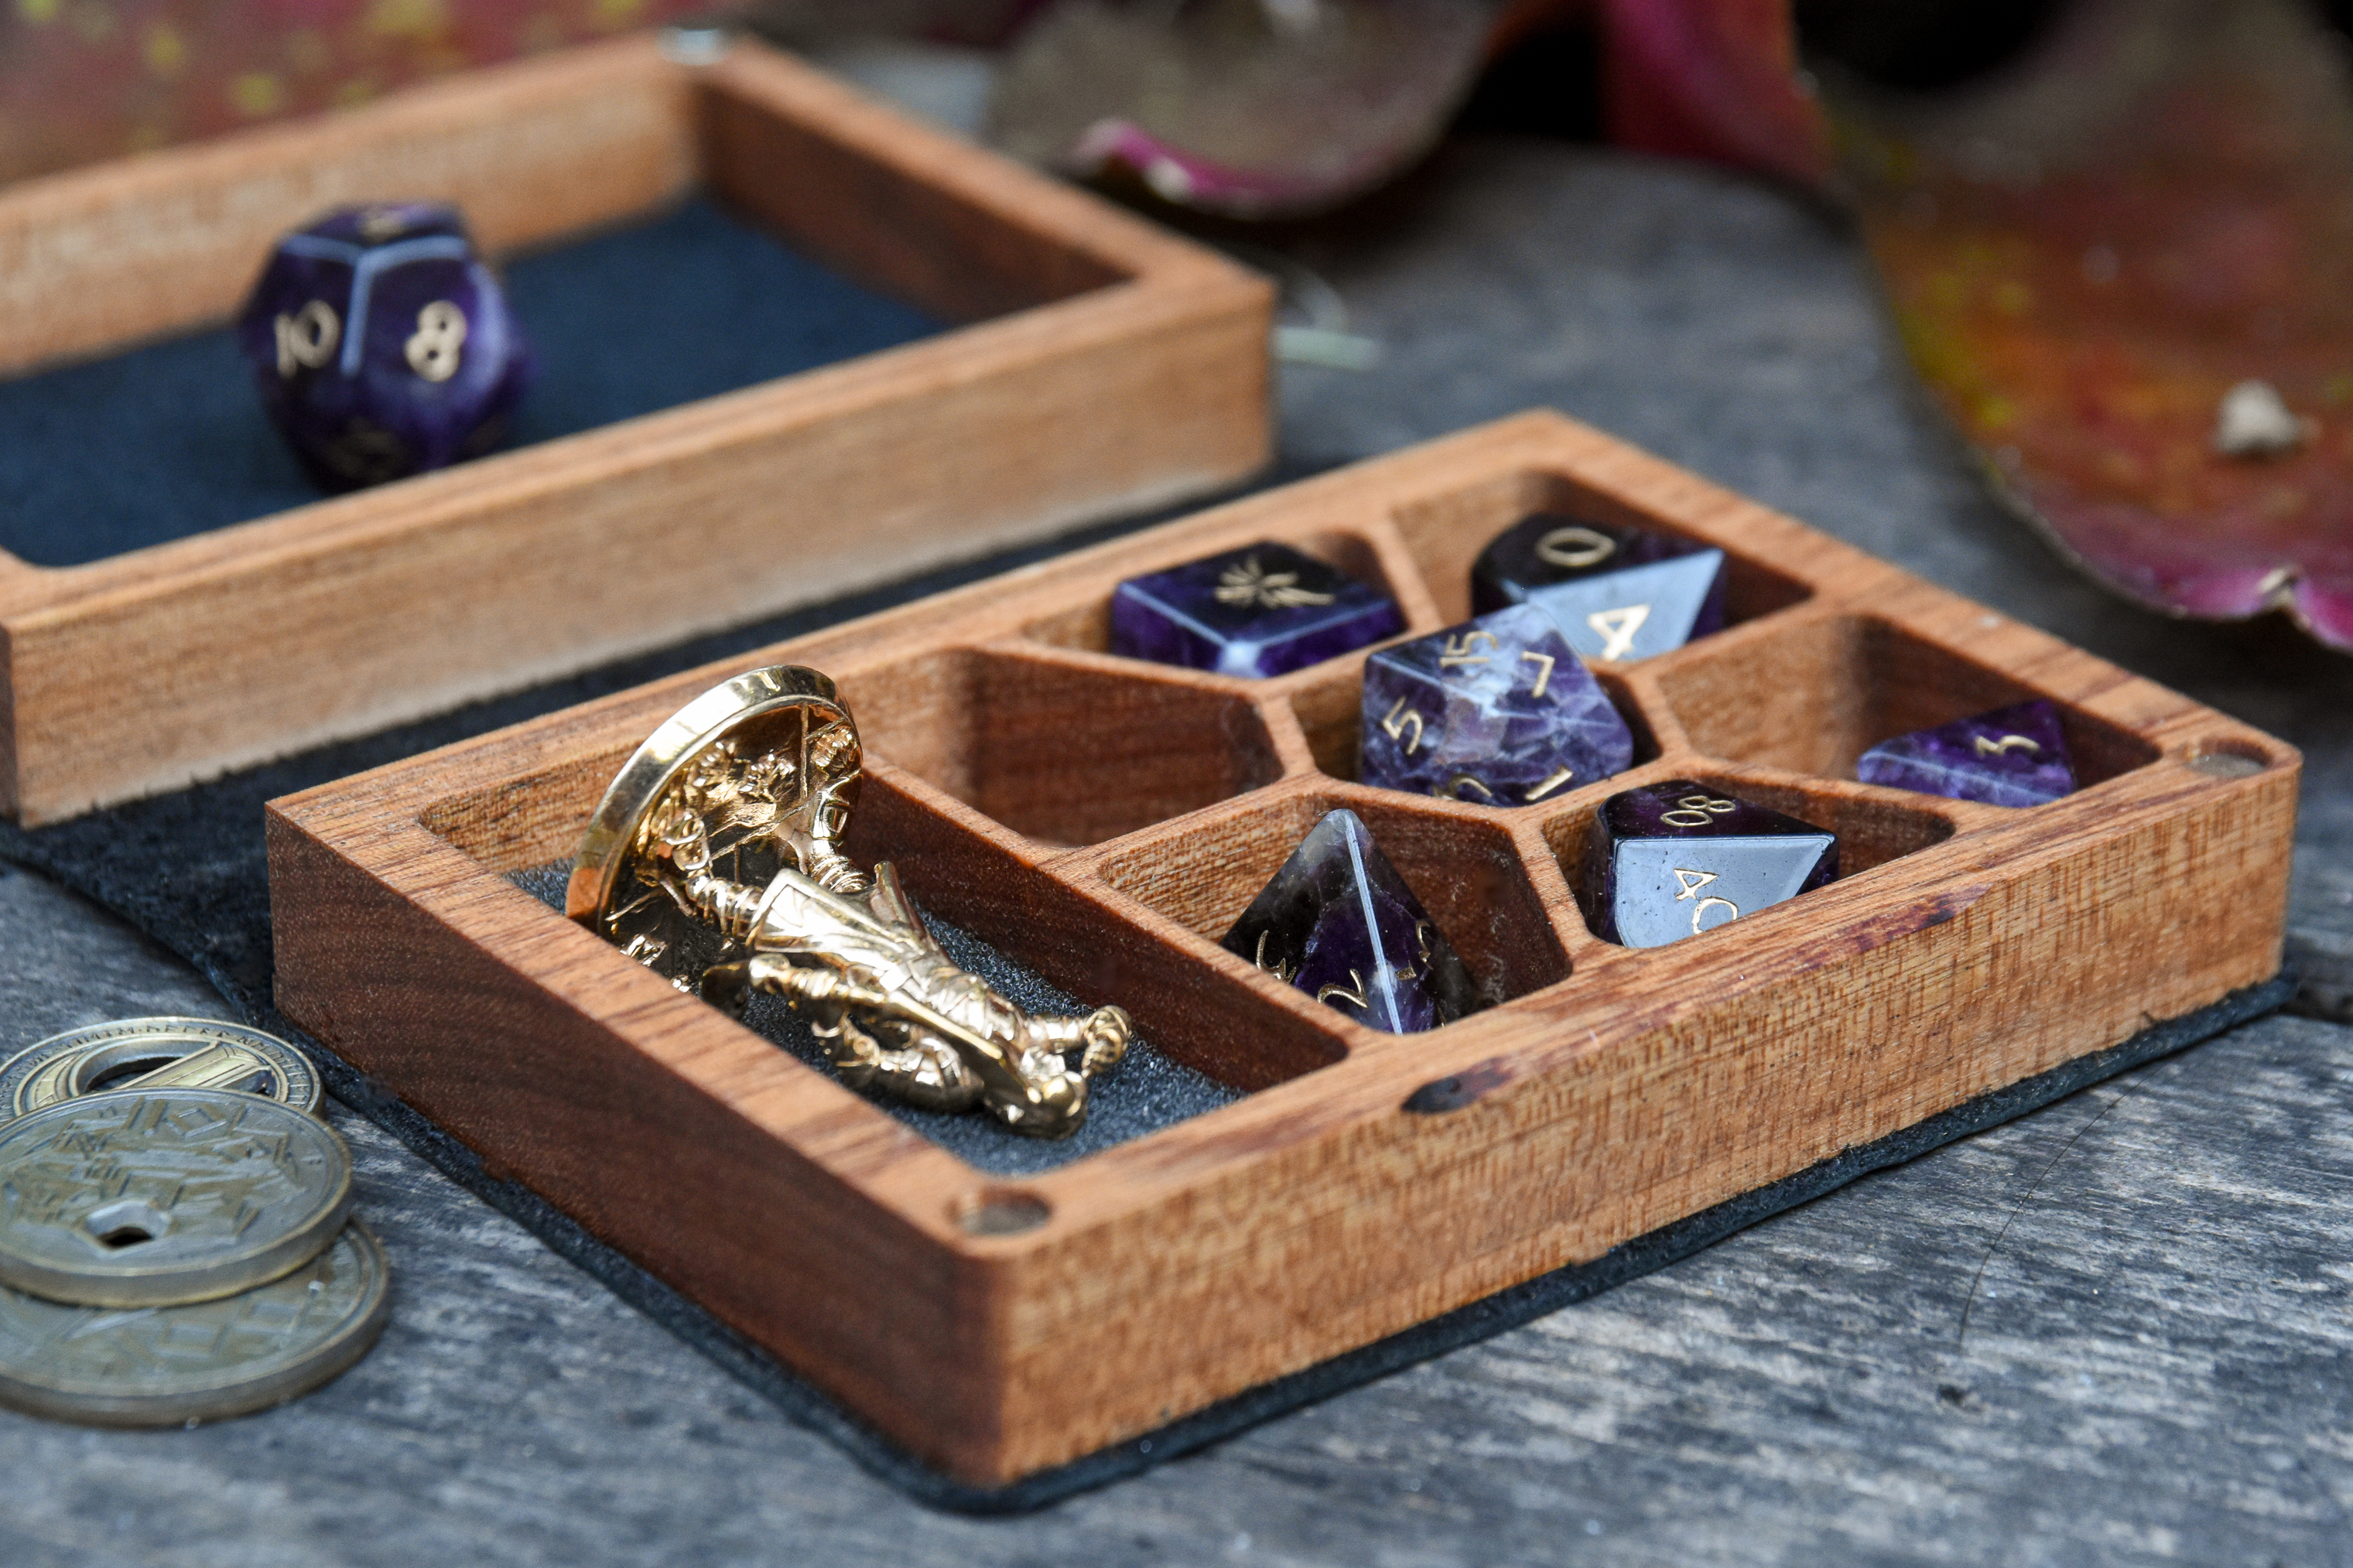 Interior of Mini Spellbook mini dice box for D&D and tabletop gaming with gemstone dice and miniature